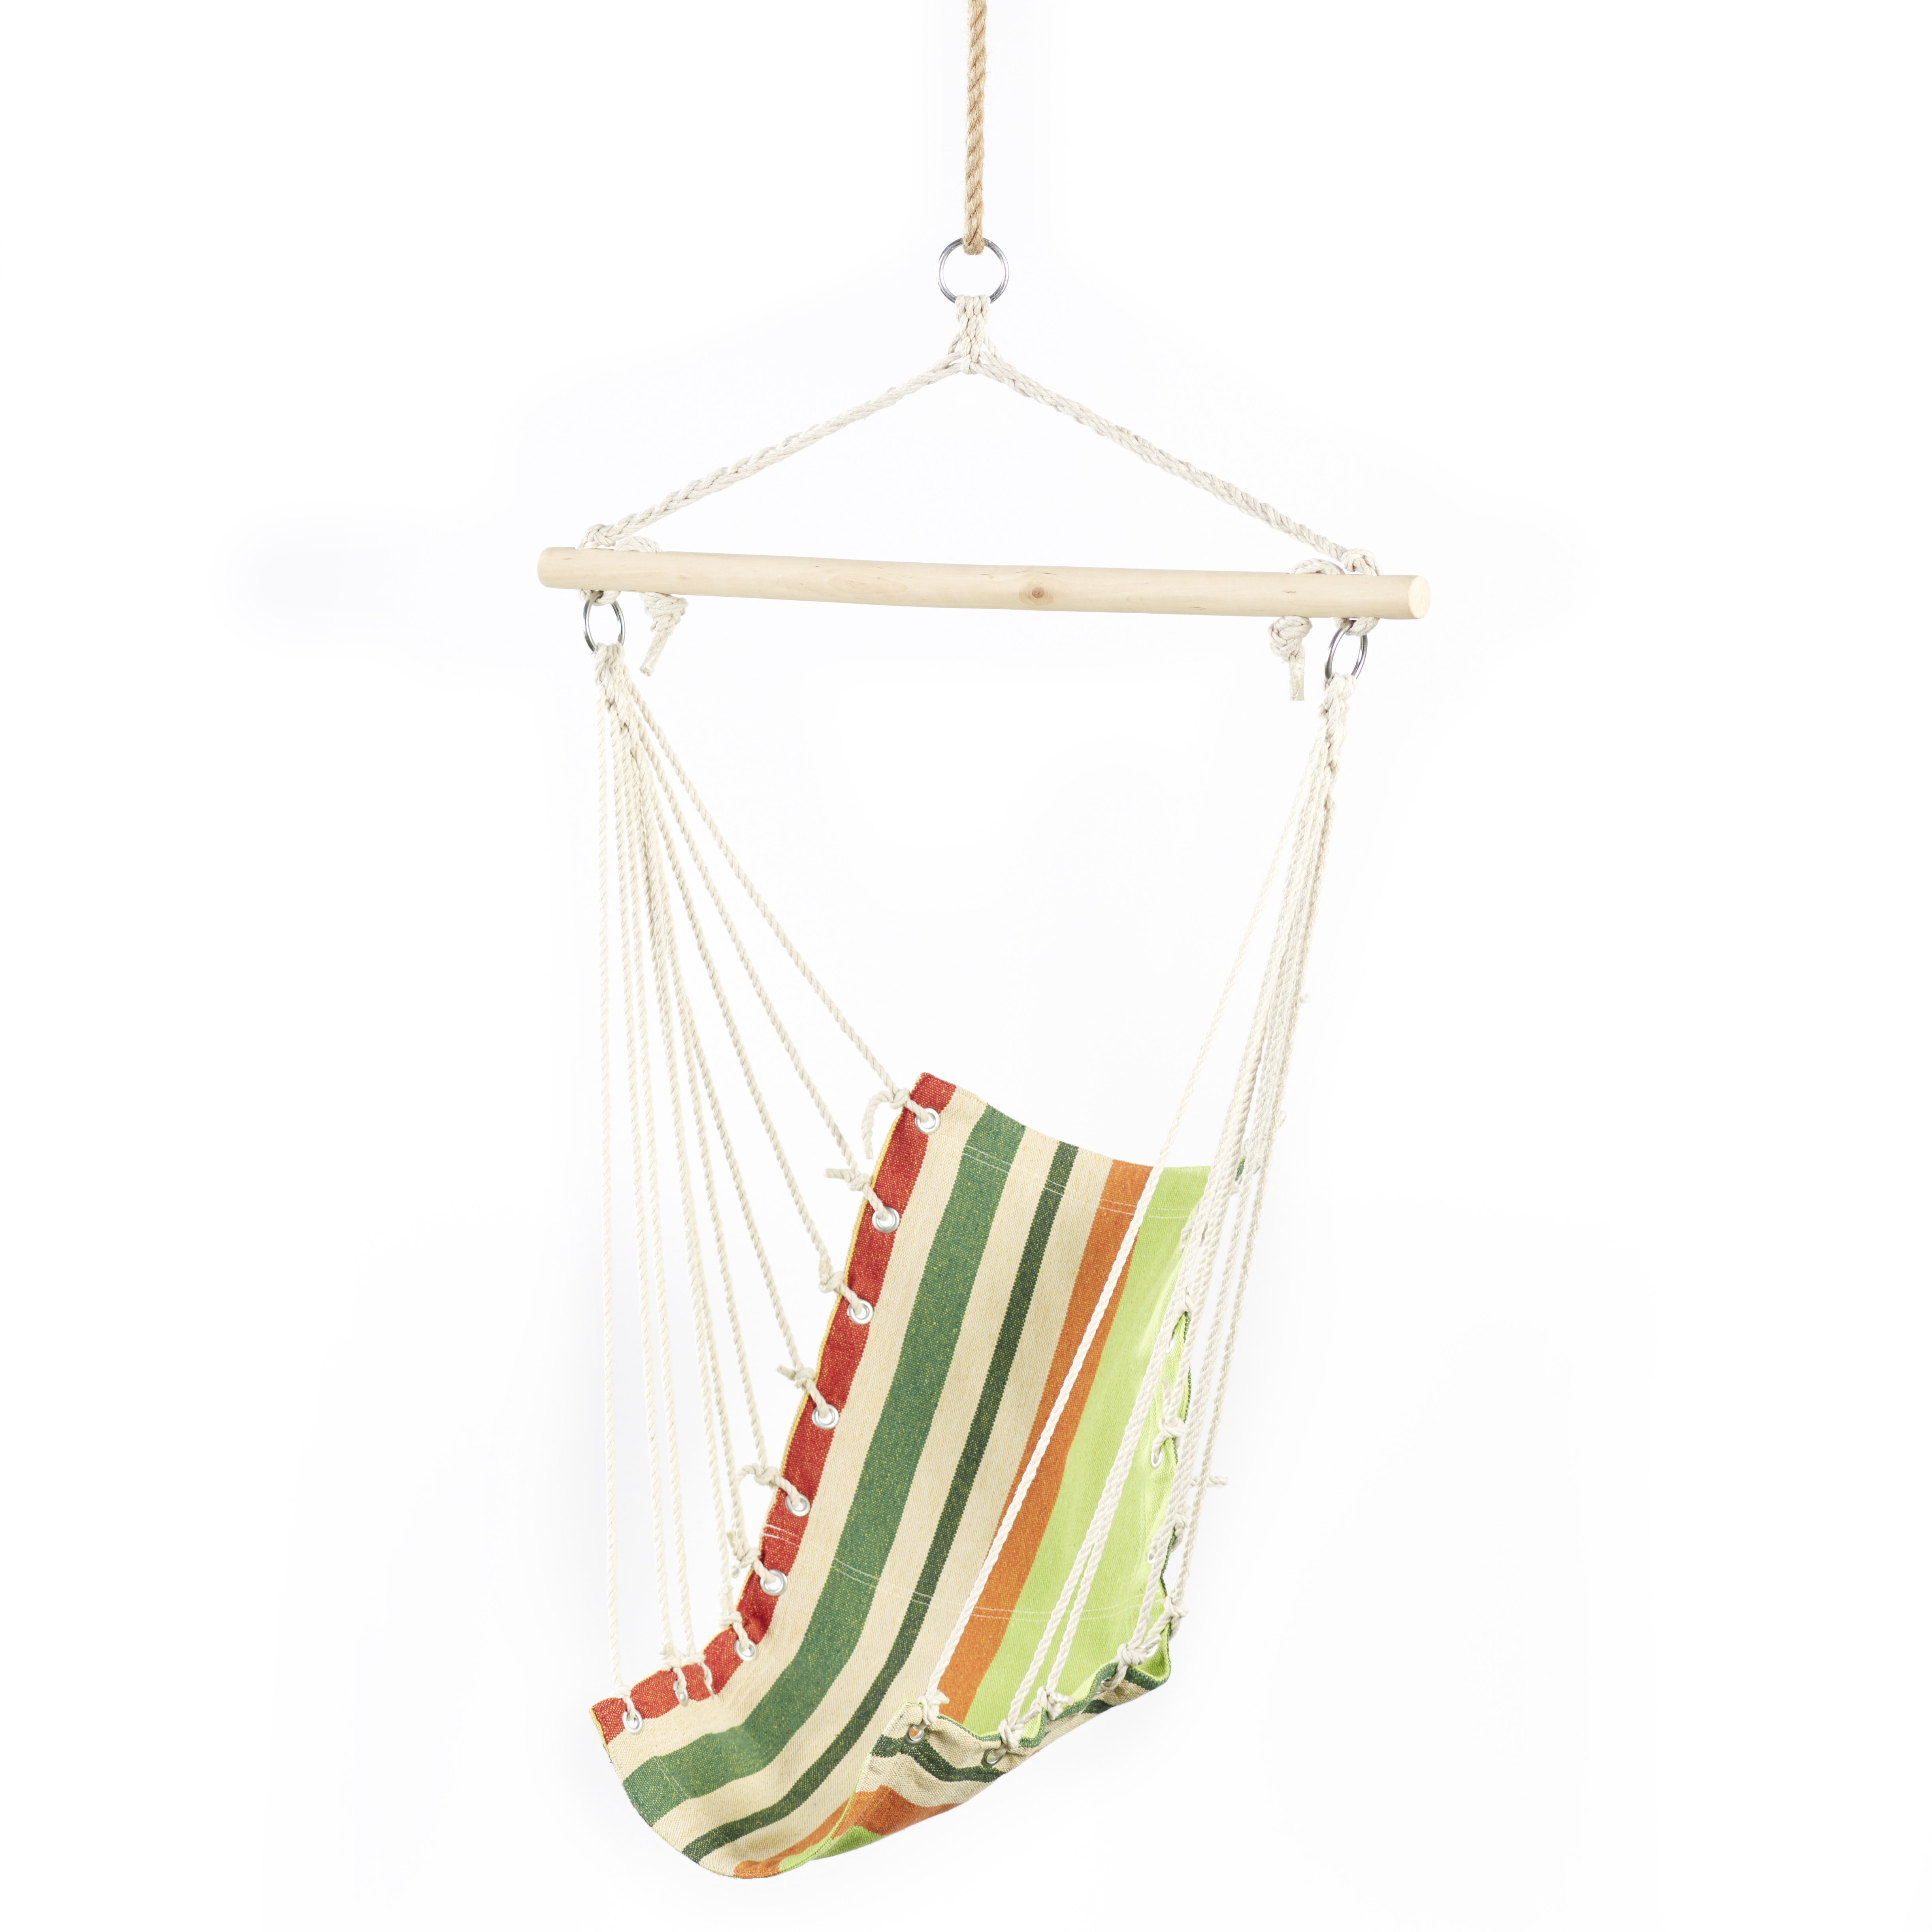 Children39s Hanging Hammock Chair With Rope Support Bar Green Stripes